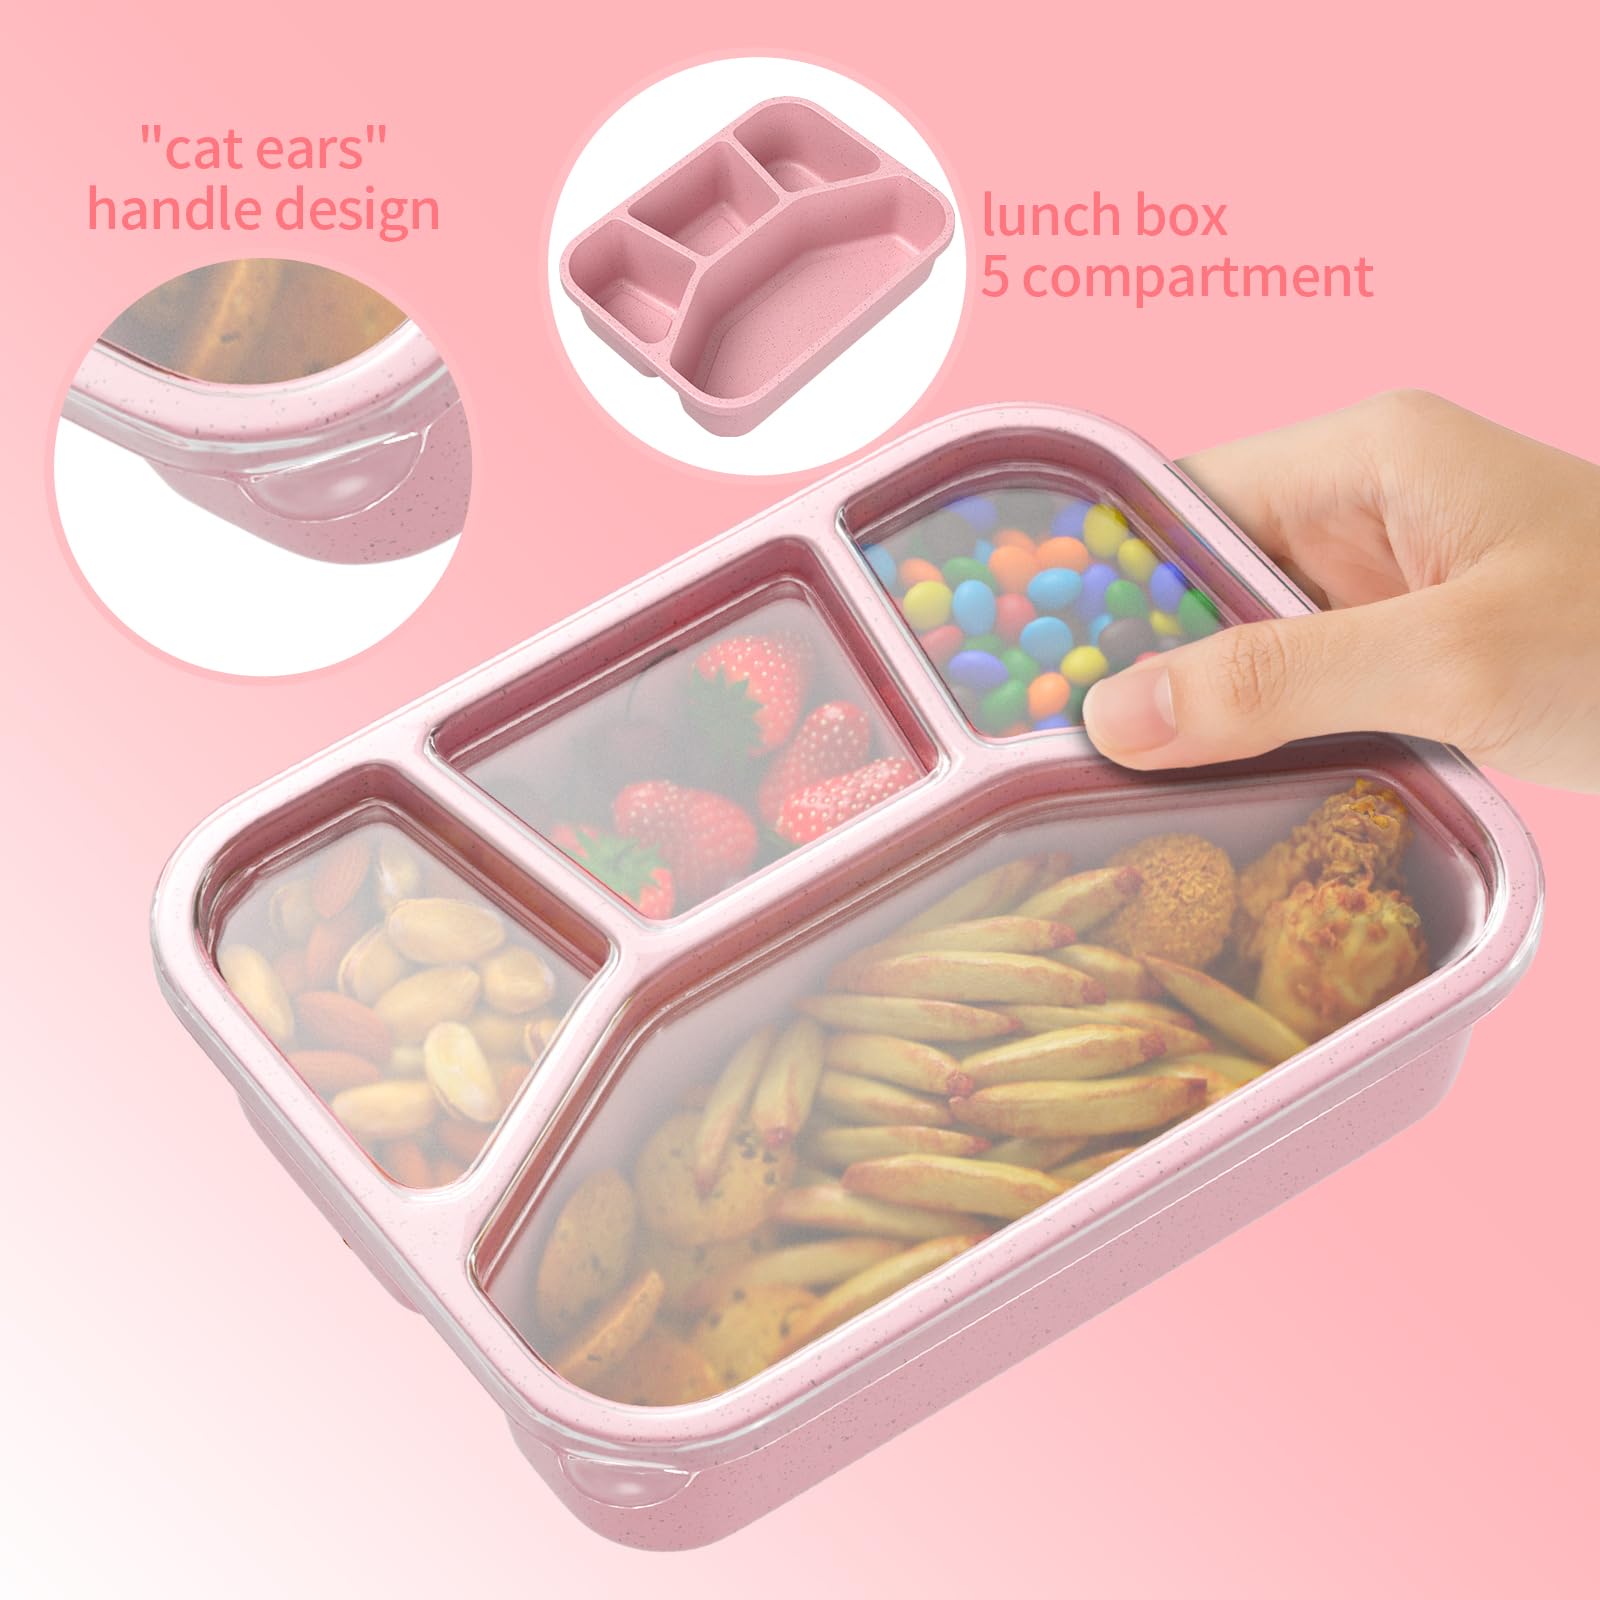 Lunch Box With Lid Reusable Bento Box Made Of Pp, 4 Compartments, A